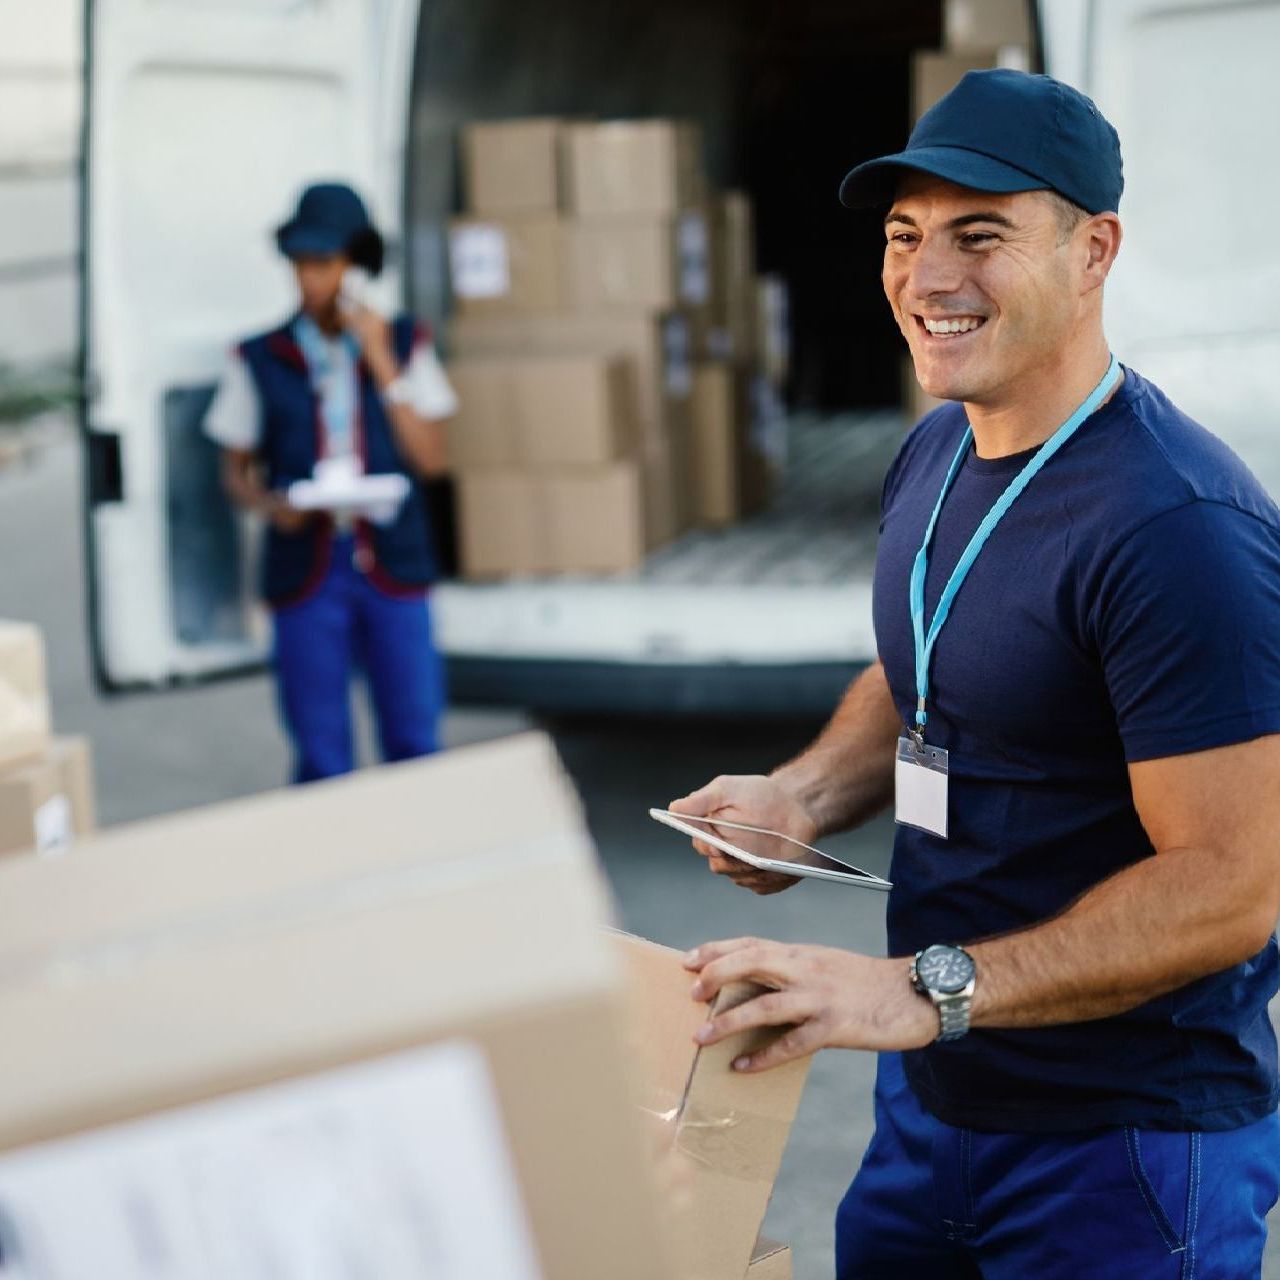 a man in a blue shirt is smiling while holding a box